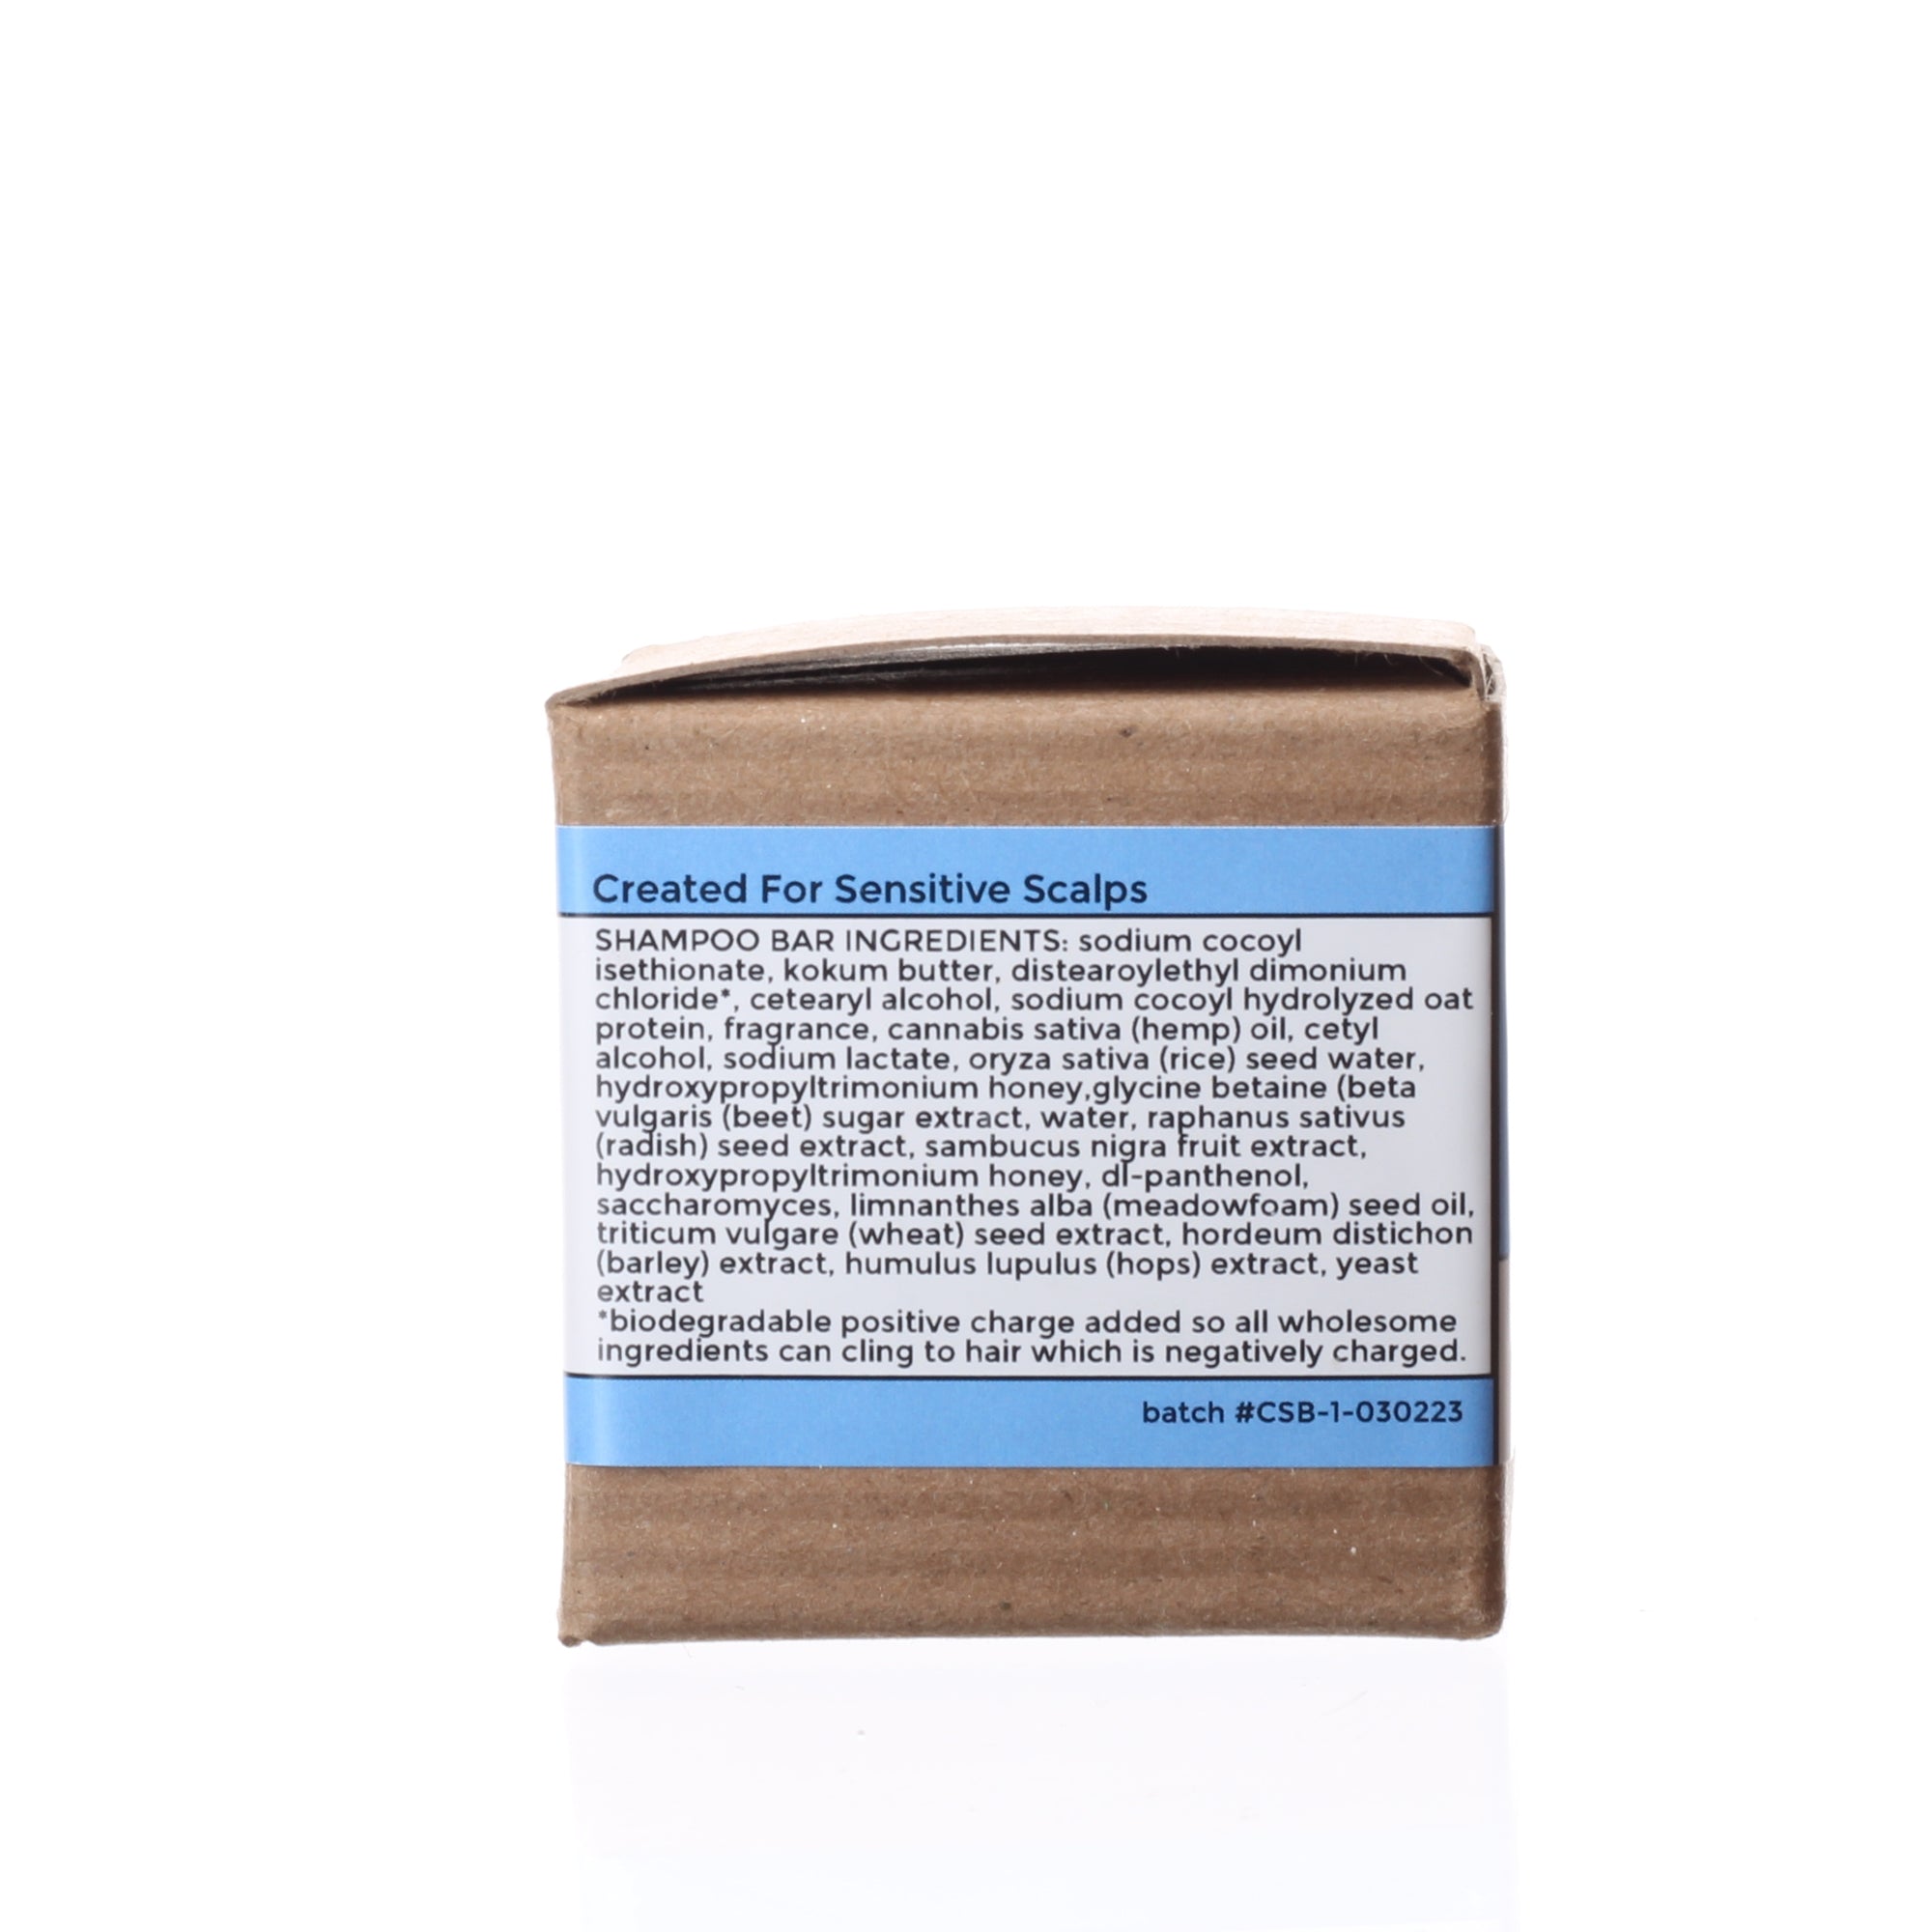 Farmbody Solid Shampoo Bar Ingredients for thick and curly and ethnic hair